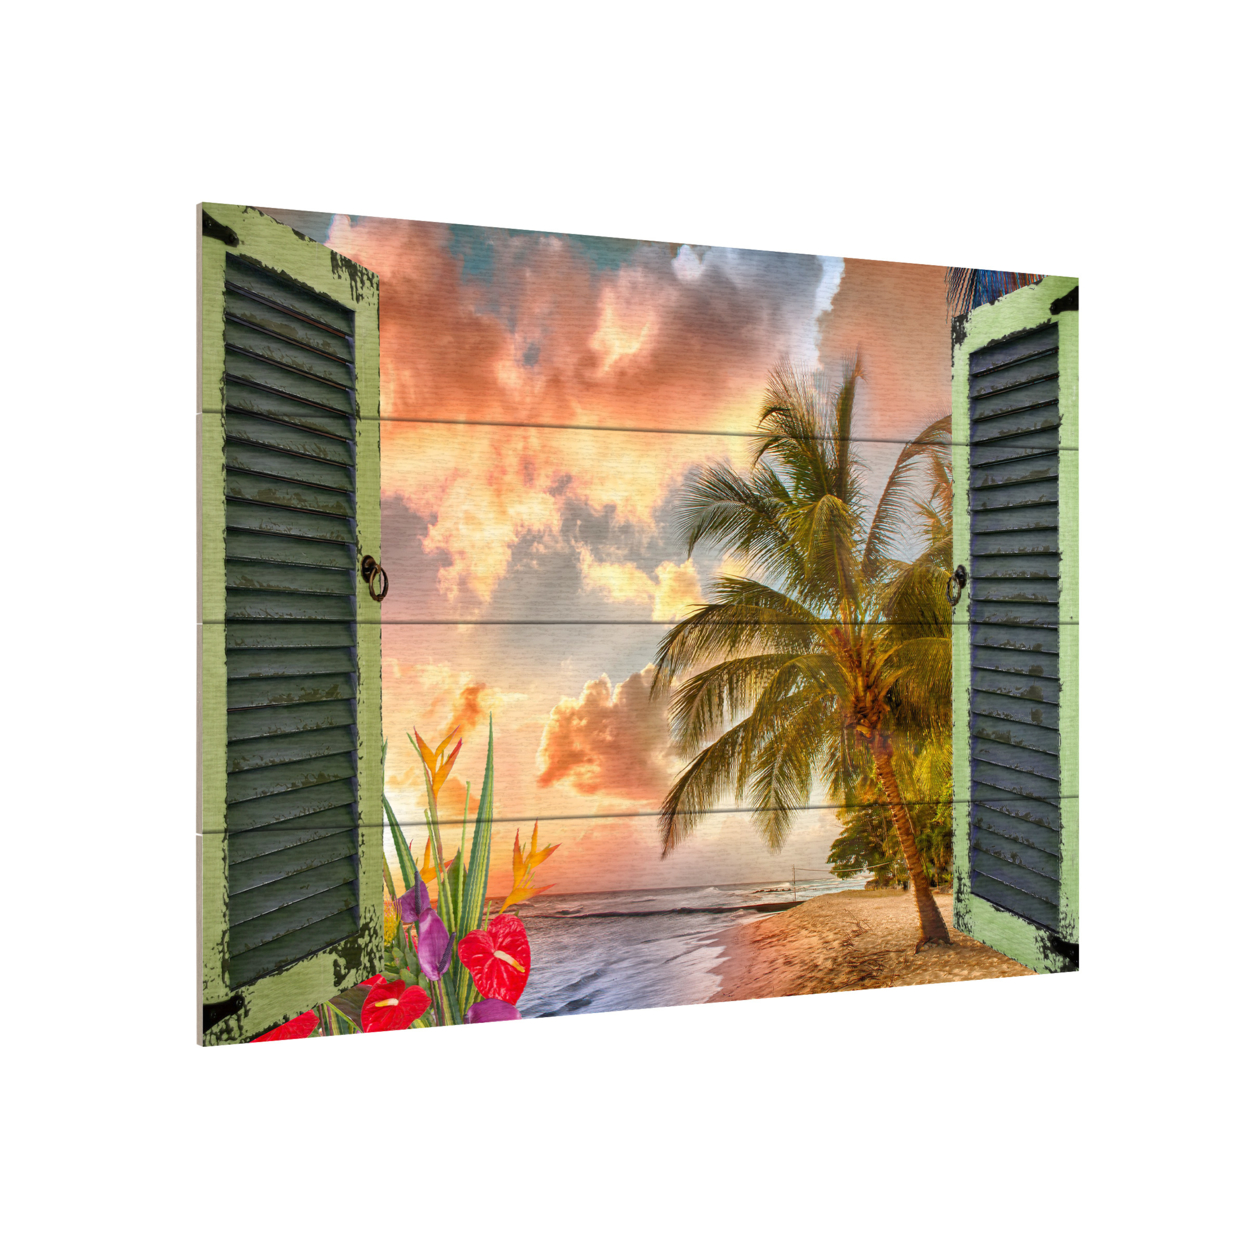 Wall Art 12 X 16 Inches Titled Window To Paradise IV Ready To Hang Printed On Wooden Planks